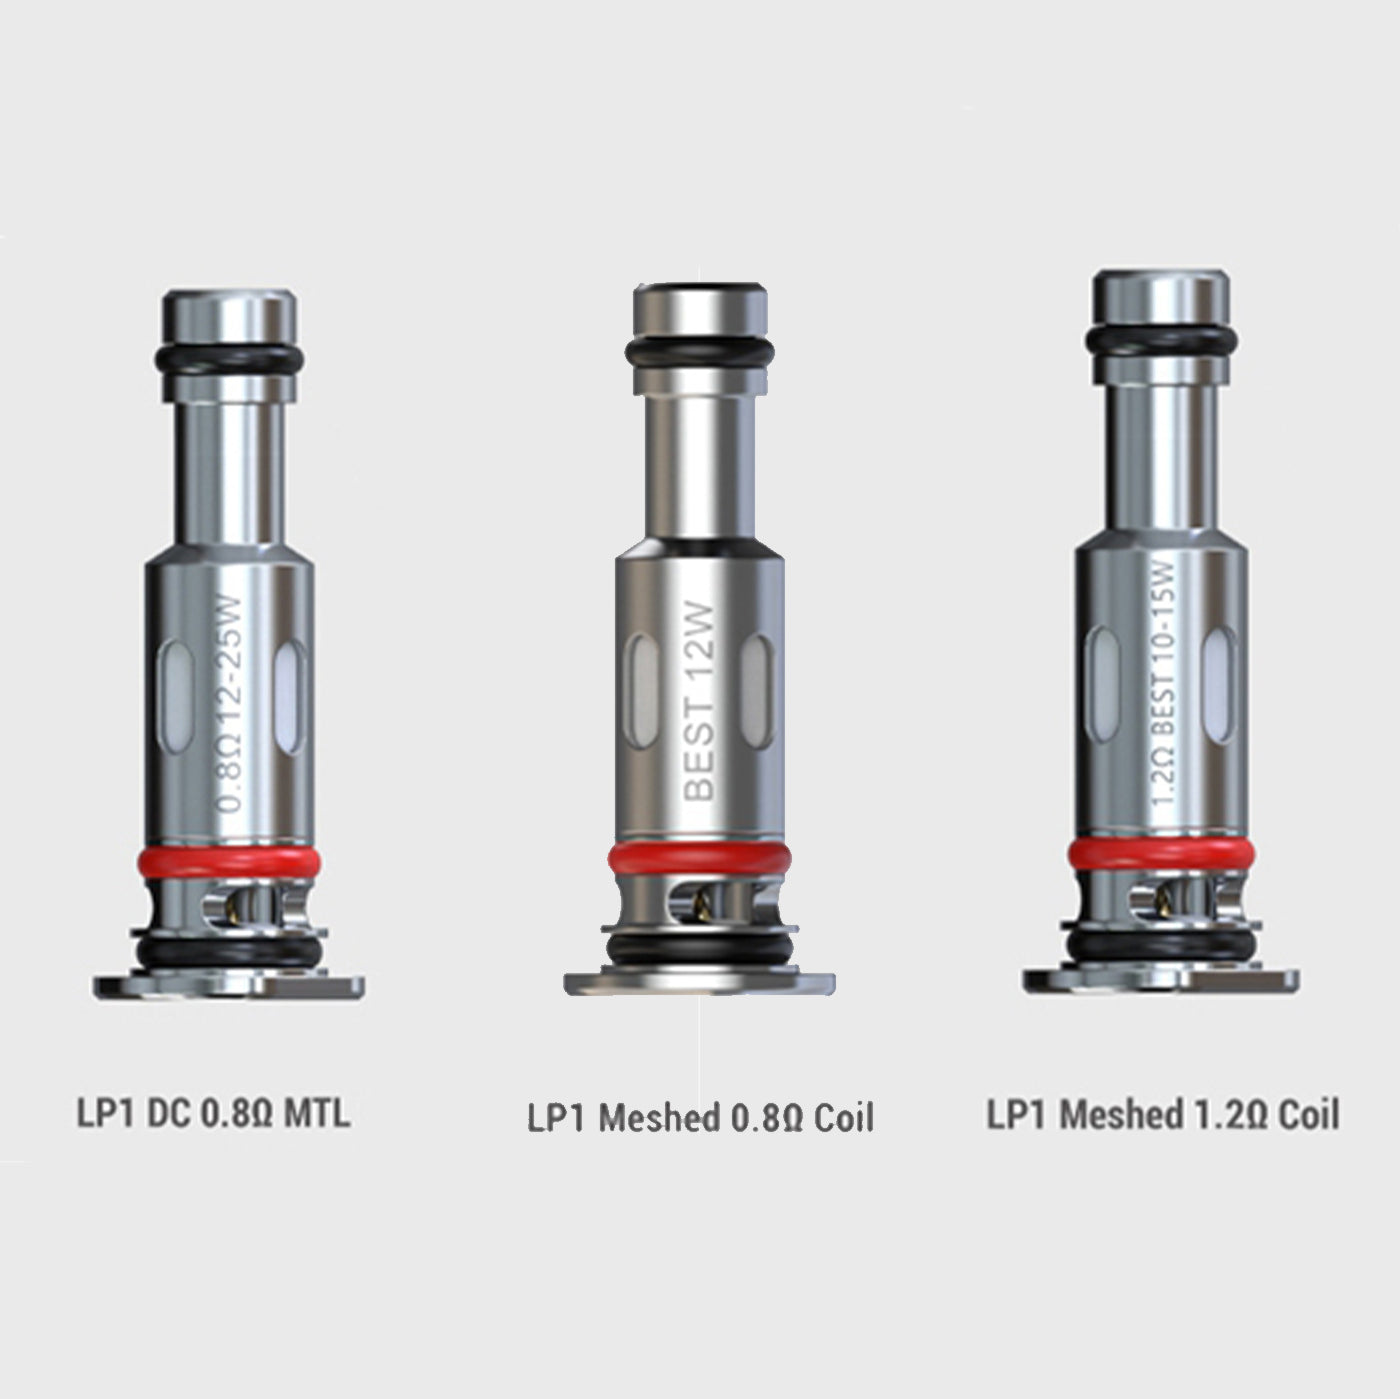 SMOK LP1 REPLACEMENT COIL (Priced Per Coil)